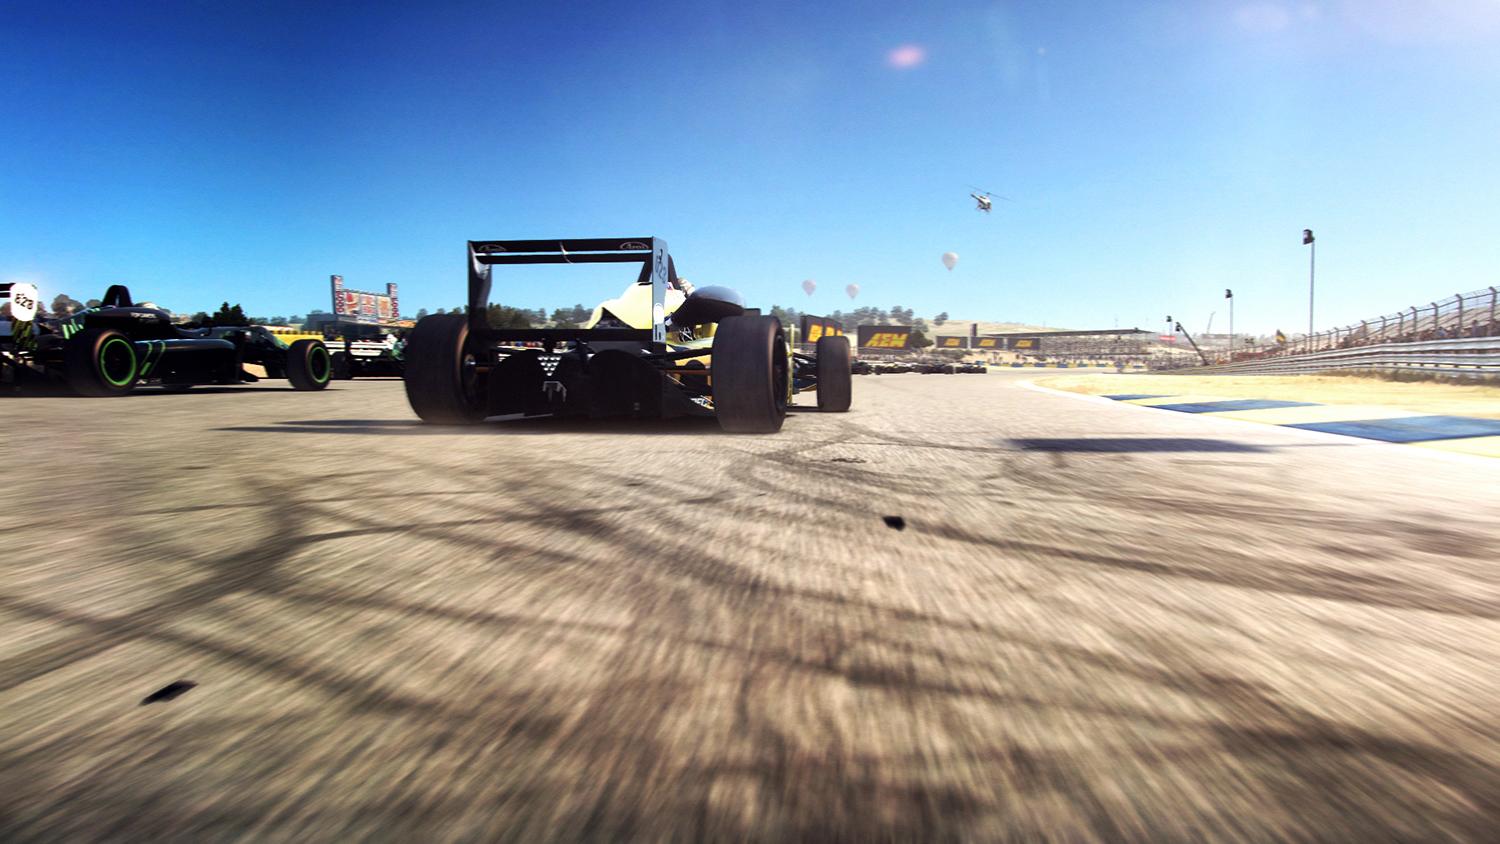 GRID: Autosport Hands On Preview